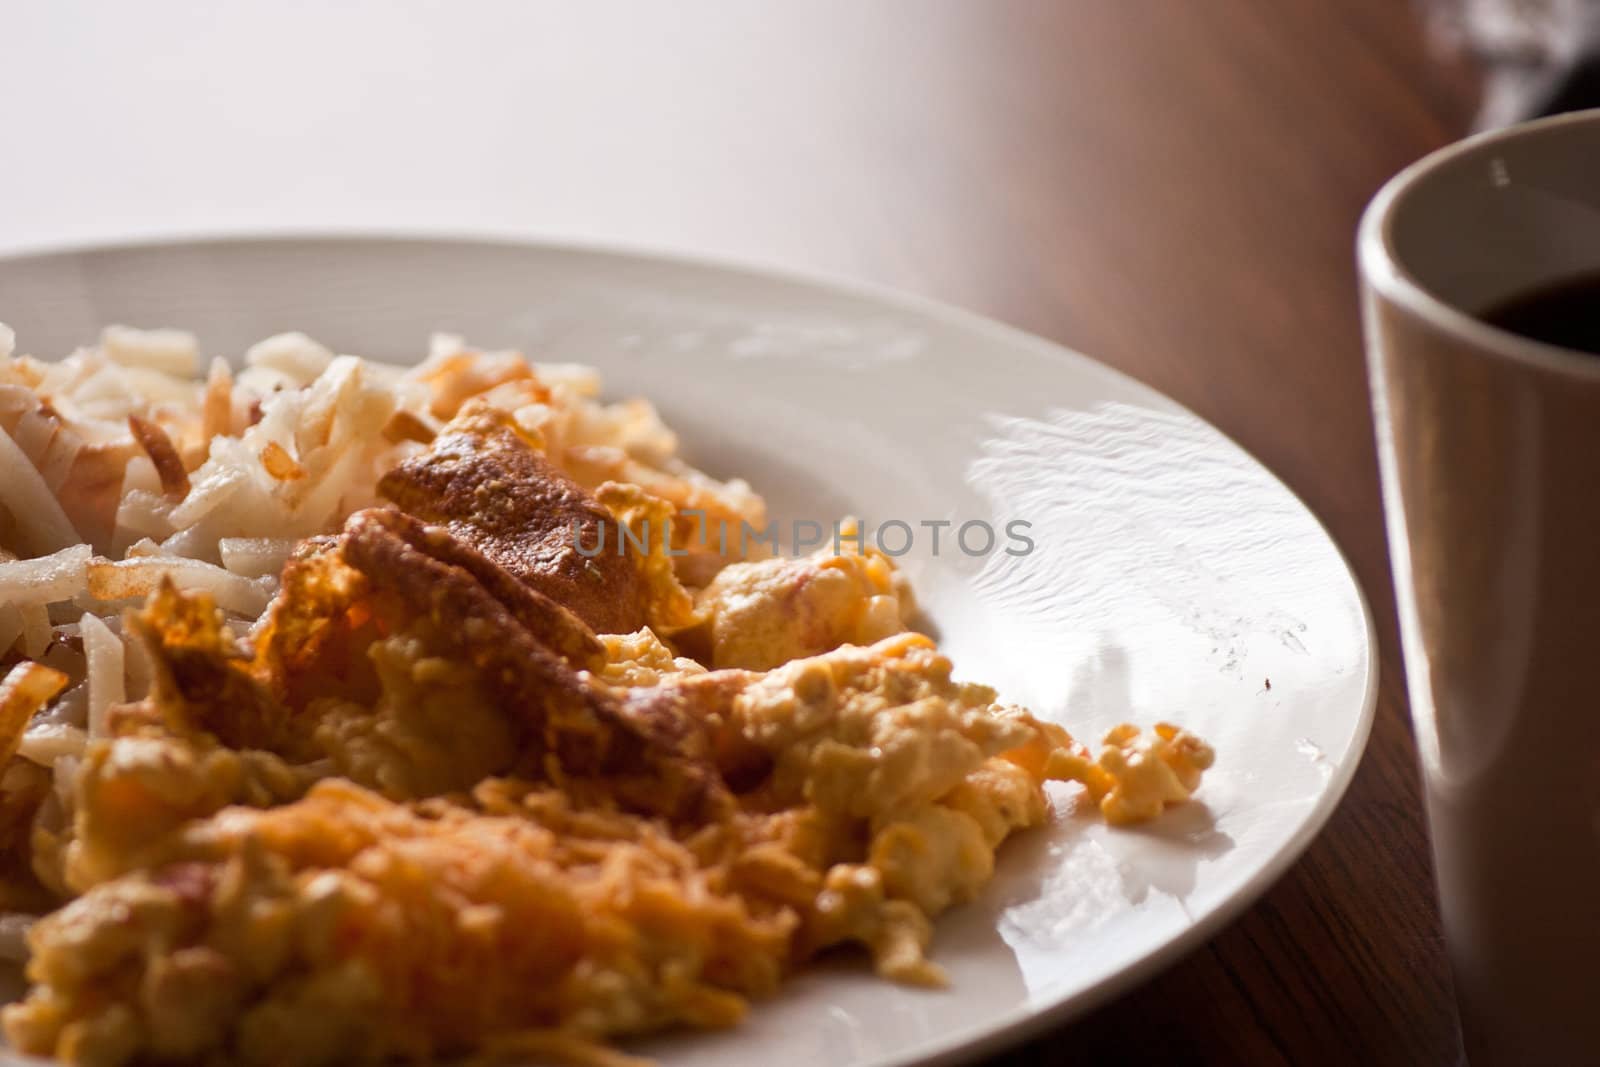 A croped view of a plate of breakfast food ready to eat with coffee cup in forground.